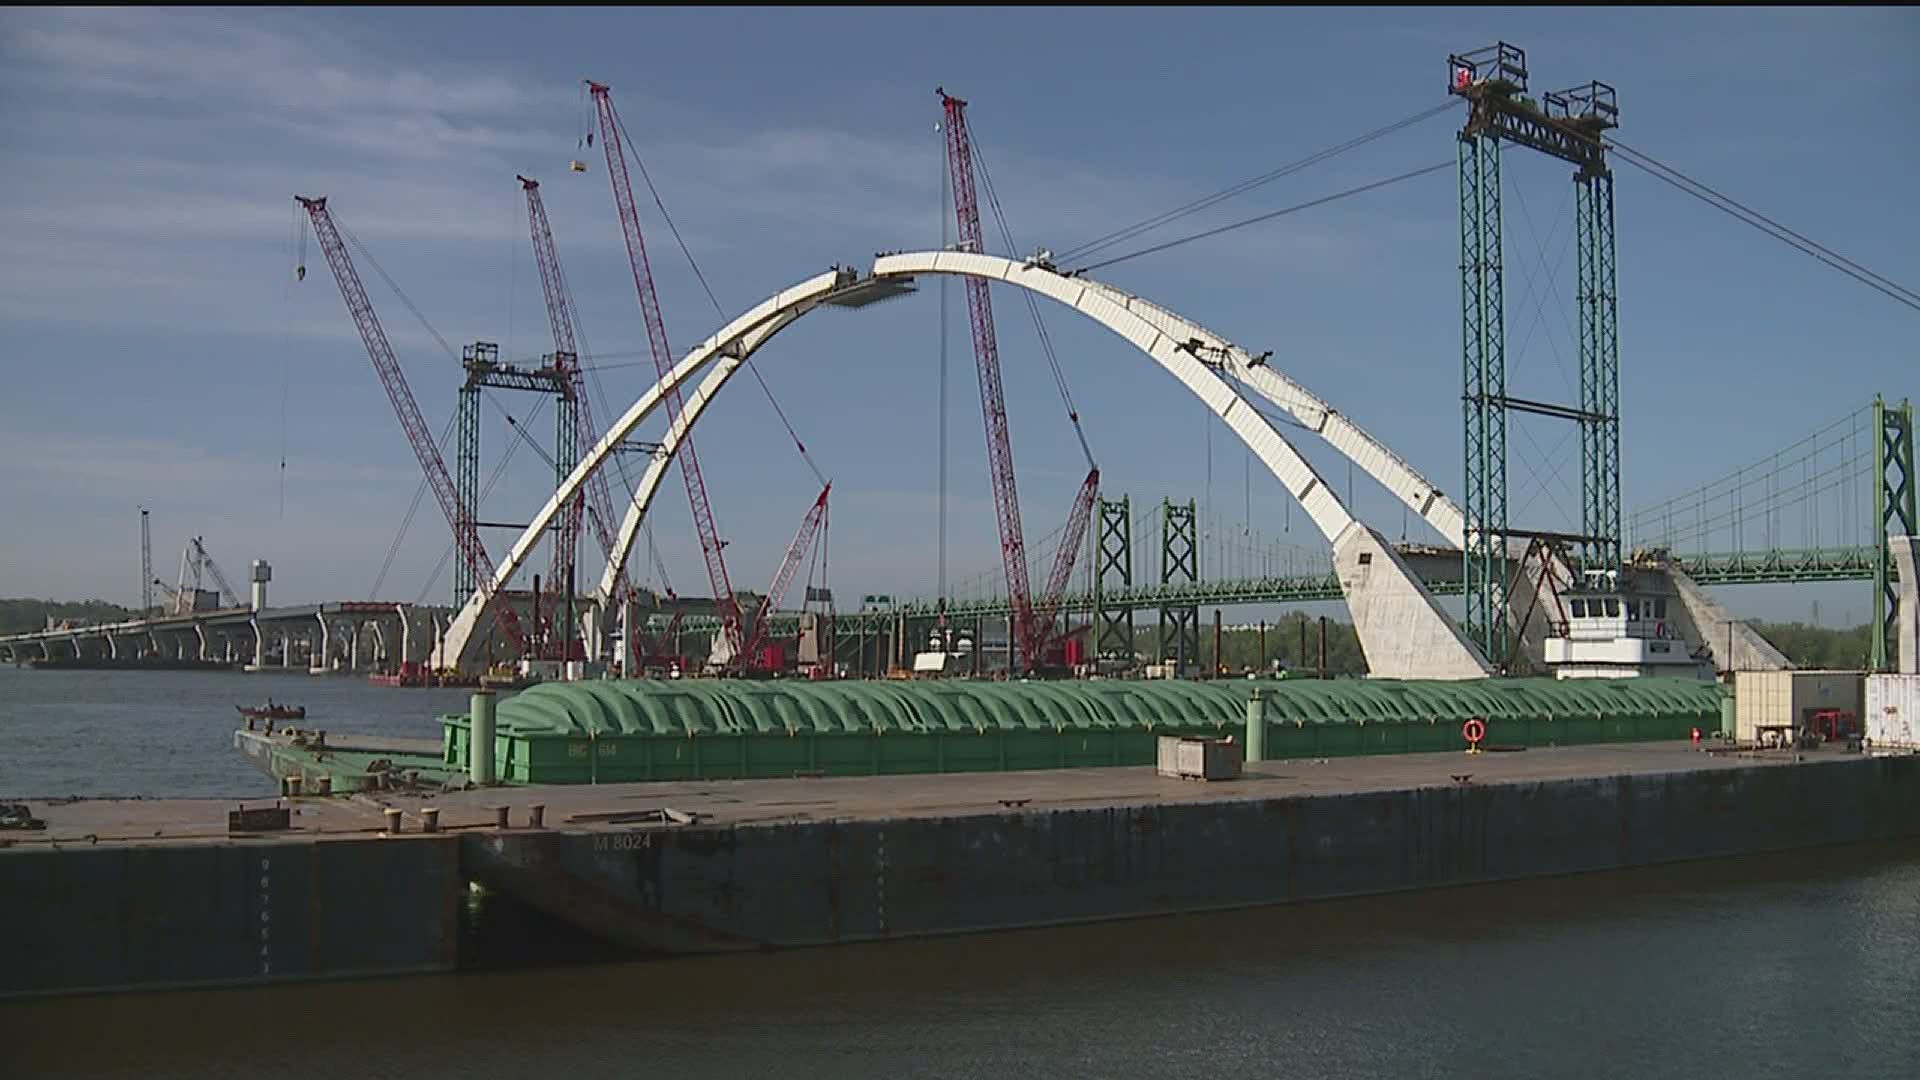 The keystone piece to the first arch of the new I-74 bridge is now in place, but it's not done yet.